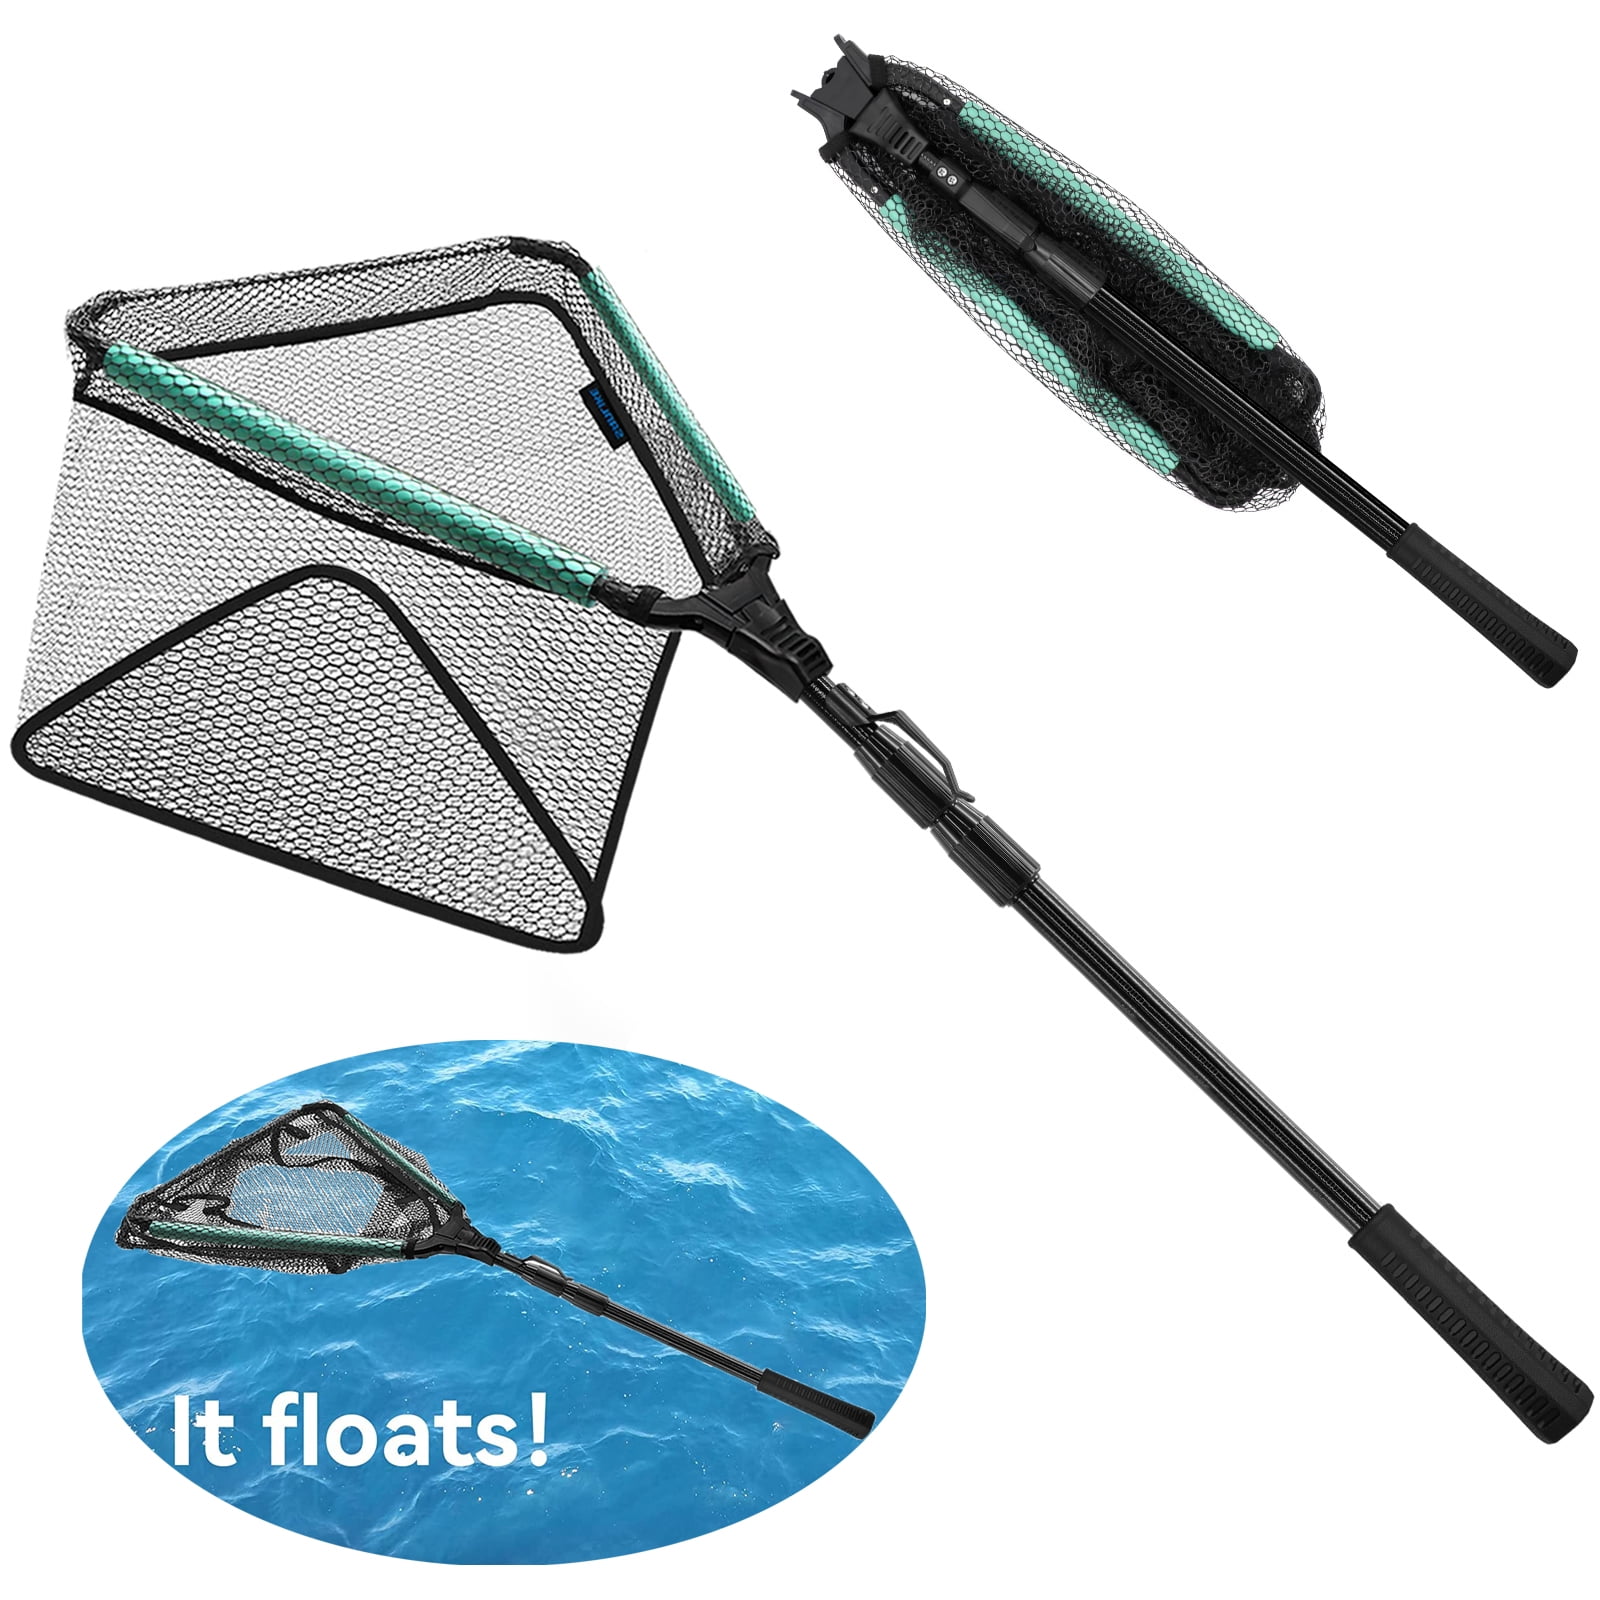 SANLIKE Fishing Net Folding Landing Net with Extra Long Telescoping Pole  Handle, Foldable Rubber Coated Fishing Net for Easy Catch Release, Compact Fish  Net, 98.4 inch/ 71 inch/ 43 inch/ 37 inch 